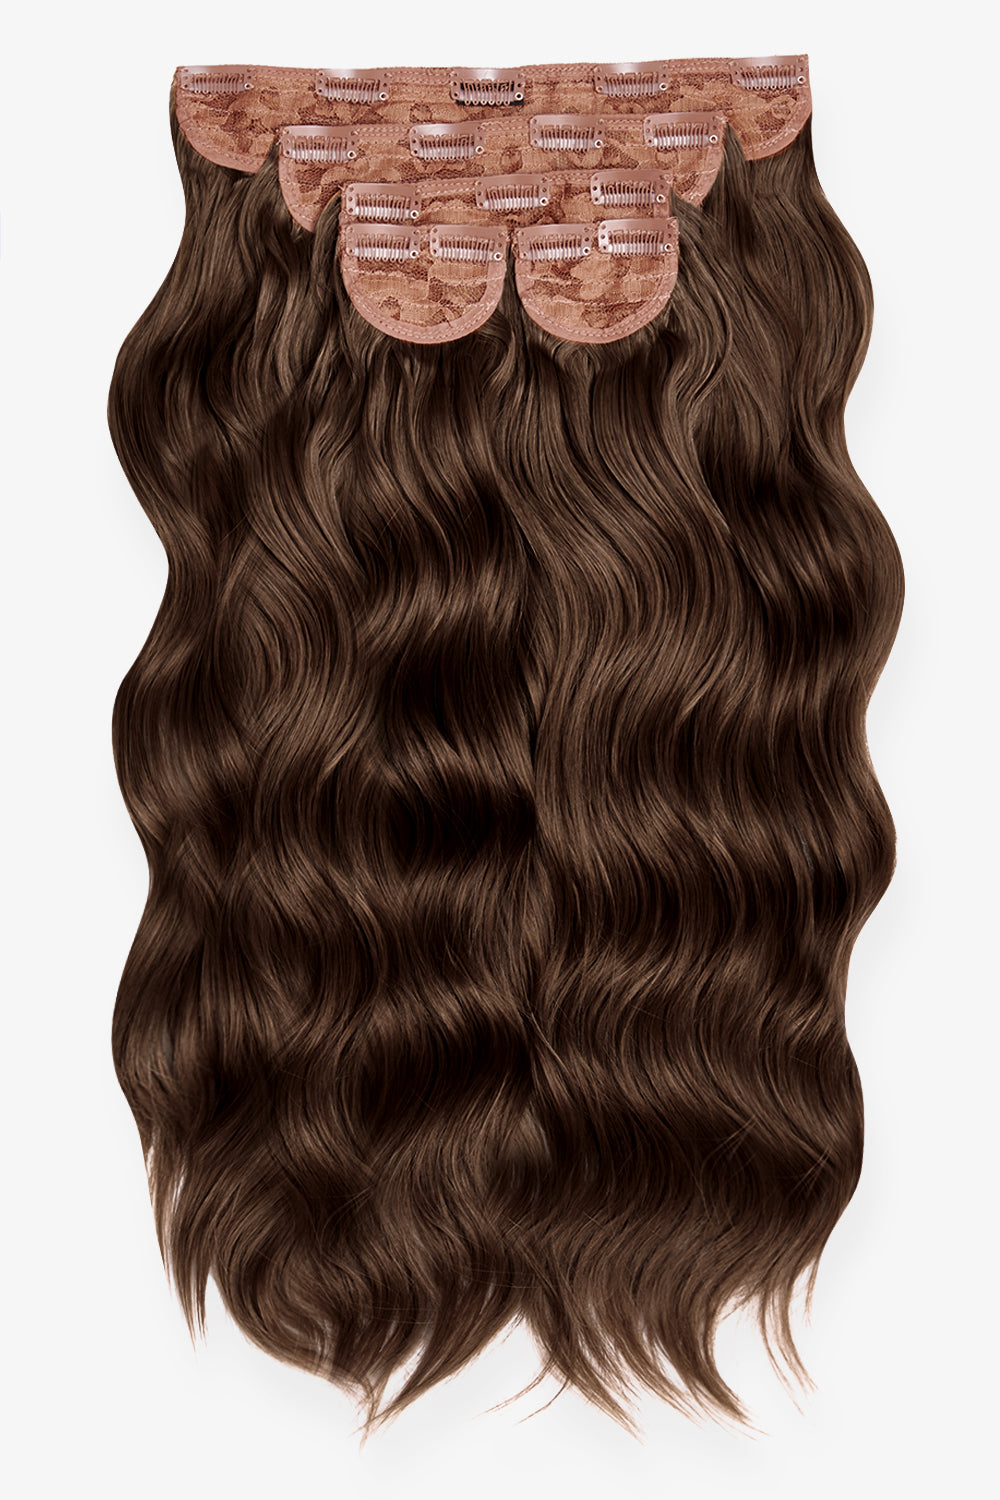 Super Thick 22" 5 Piece Brushed Out Wave Clip in Hair Extensions + Hair Care Bundle - Chestnut